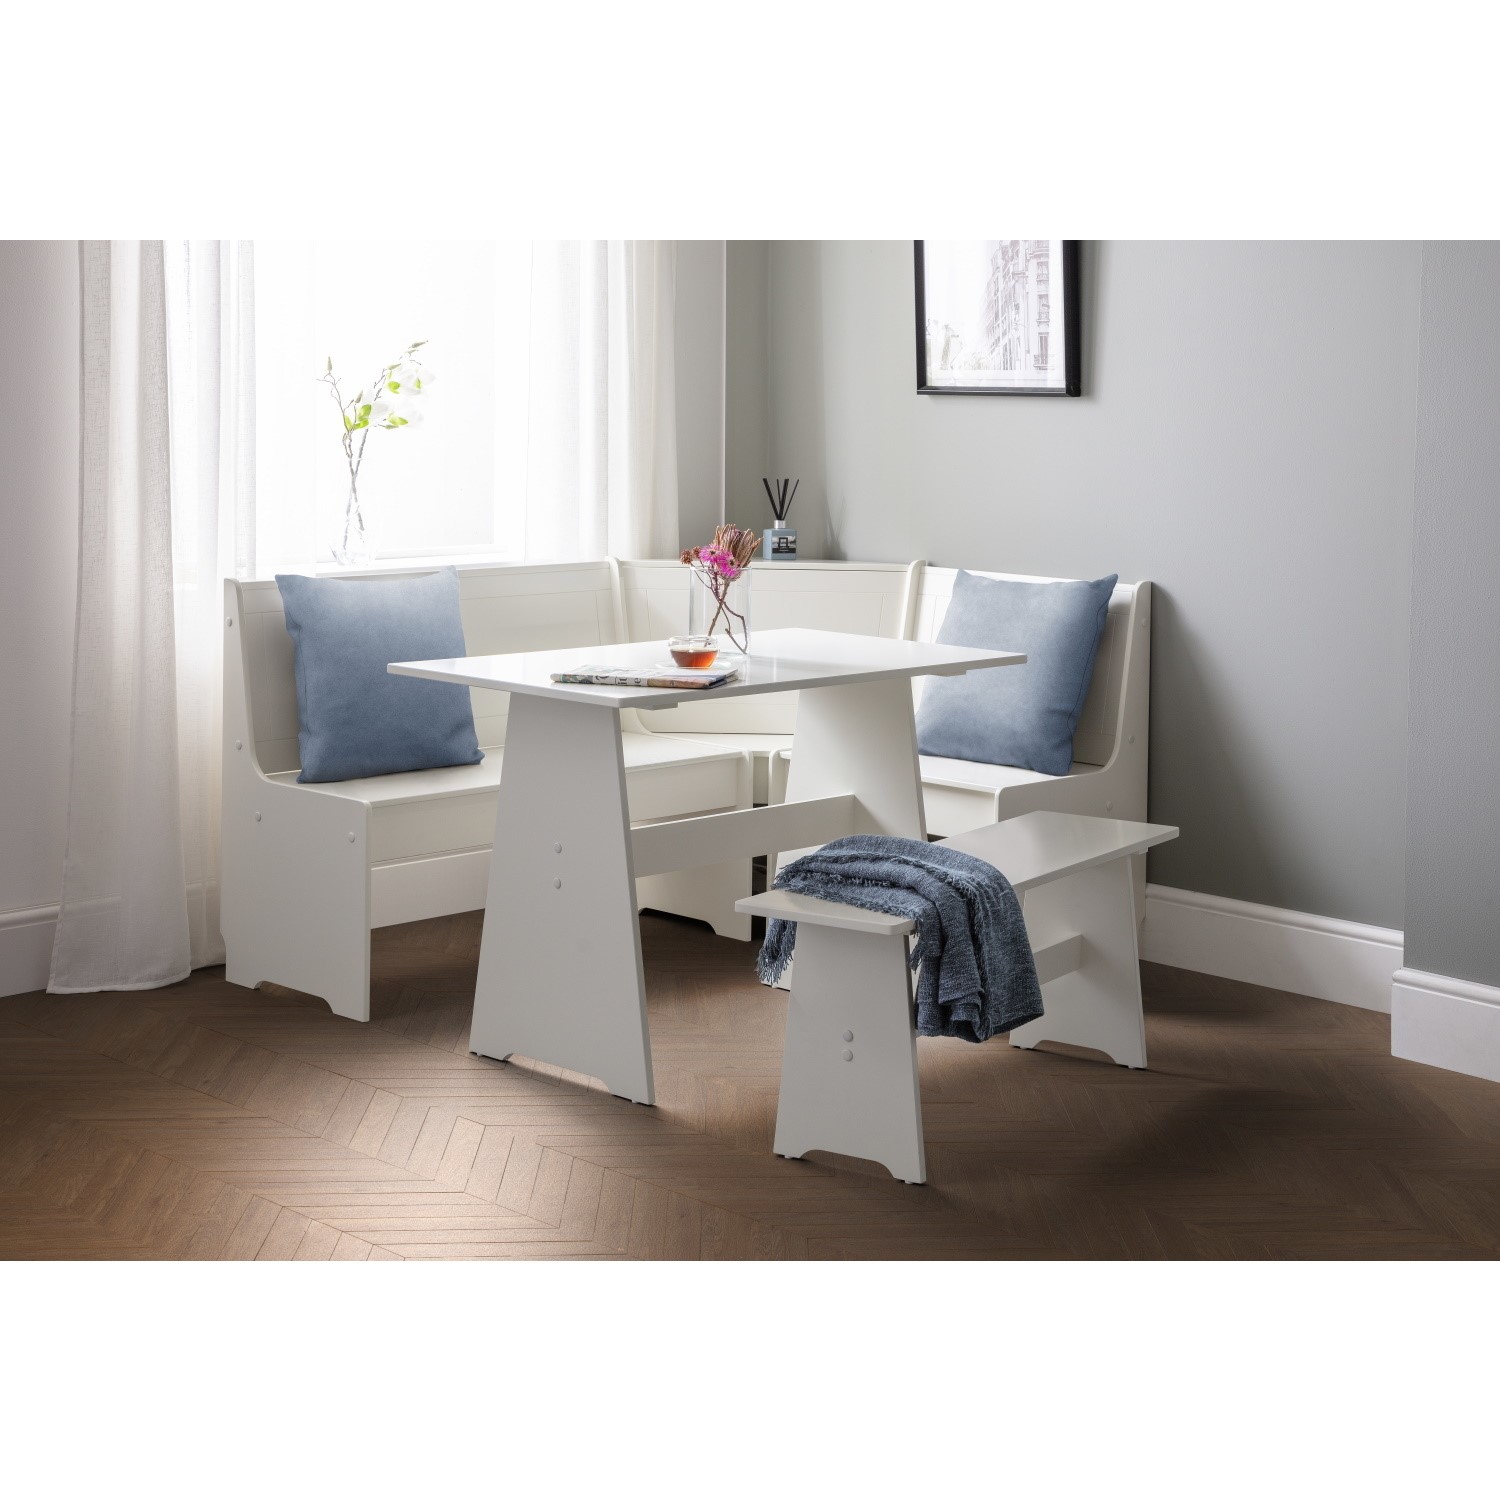 Photo of White corner dining set with a matching bench - newport